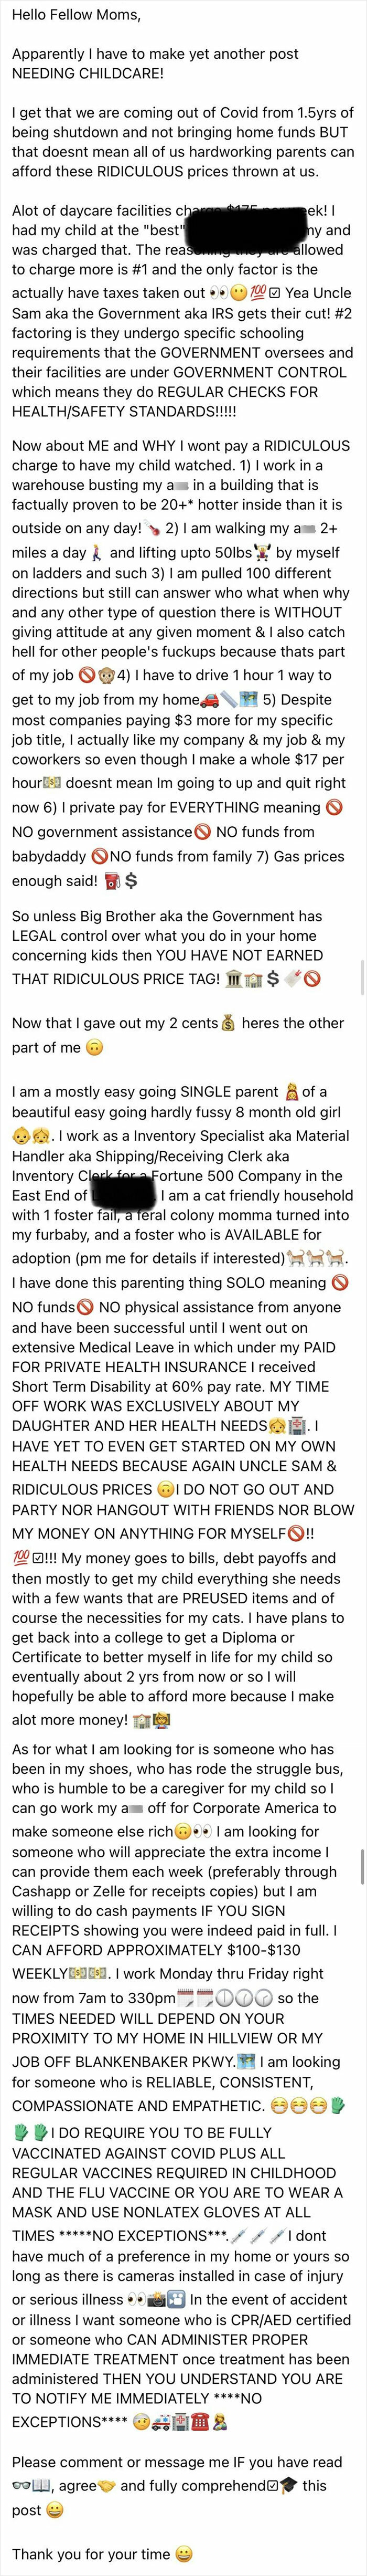 Childcare For Less Than $3/Hr!